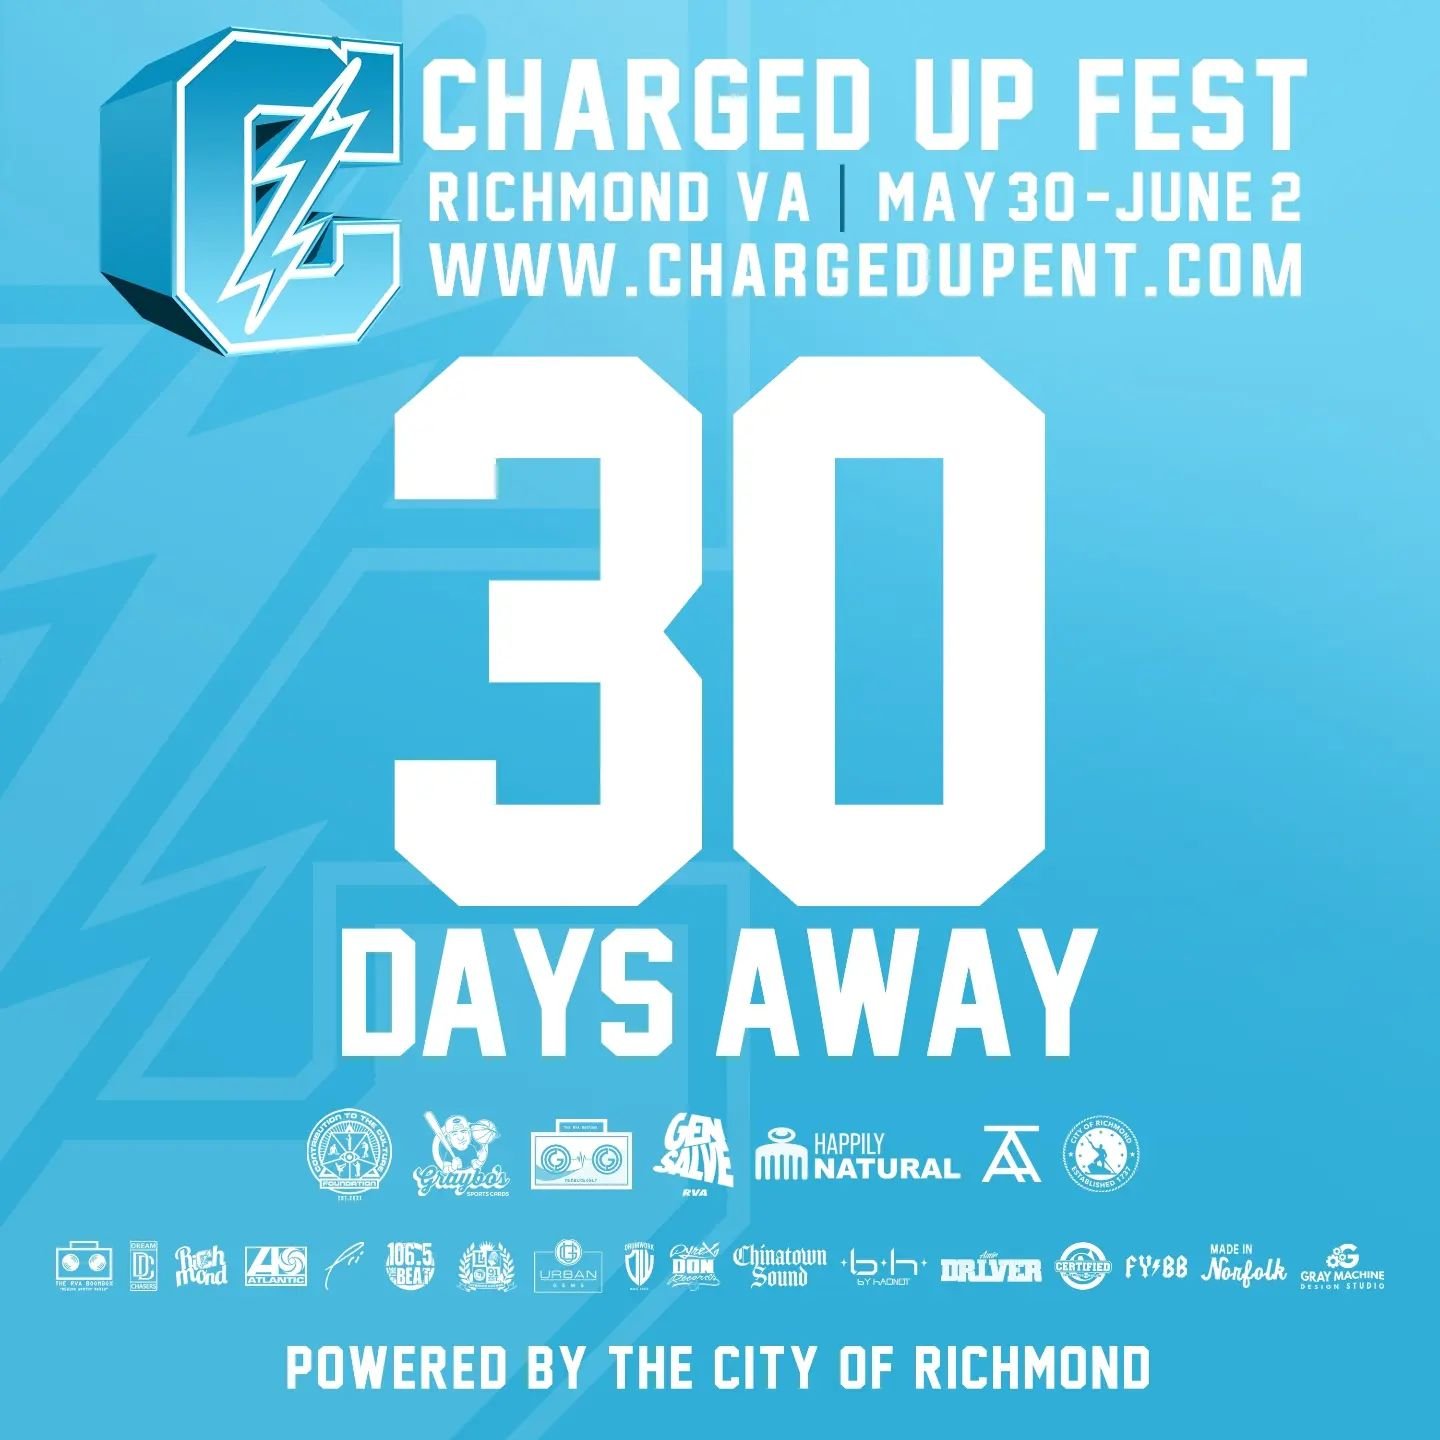 We are 30 days away from the inaugural @chargedupfest in Richmond, Virginia.

For the first time major &amp; independent artists, labels and platforms will converge in RVA for 4 days of Community, Culture &amp; Education.

For tickets &amp; itinerary